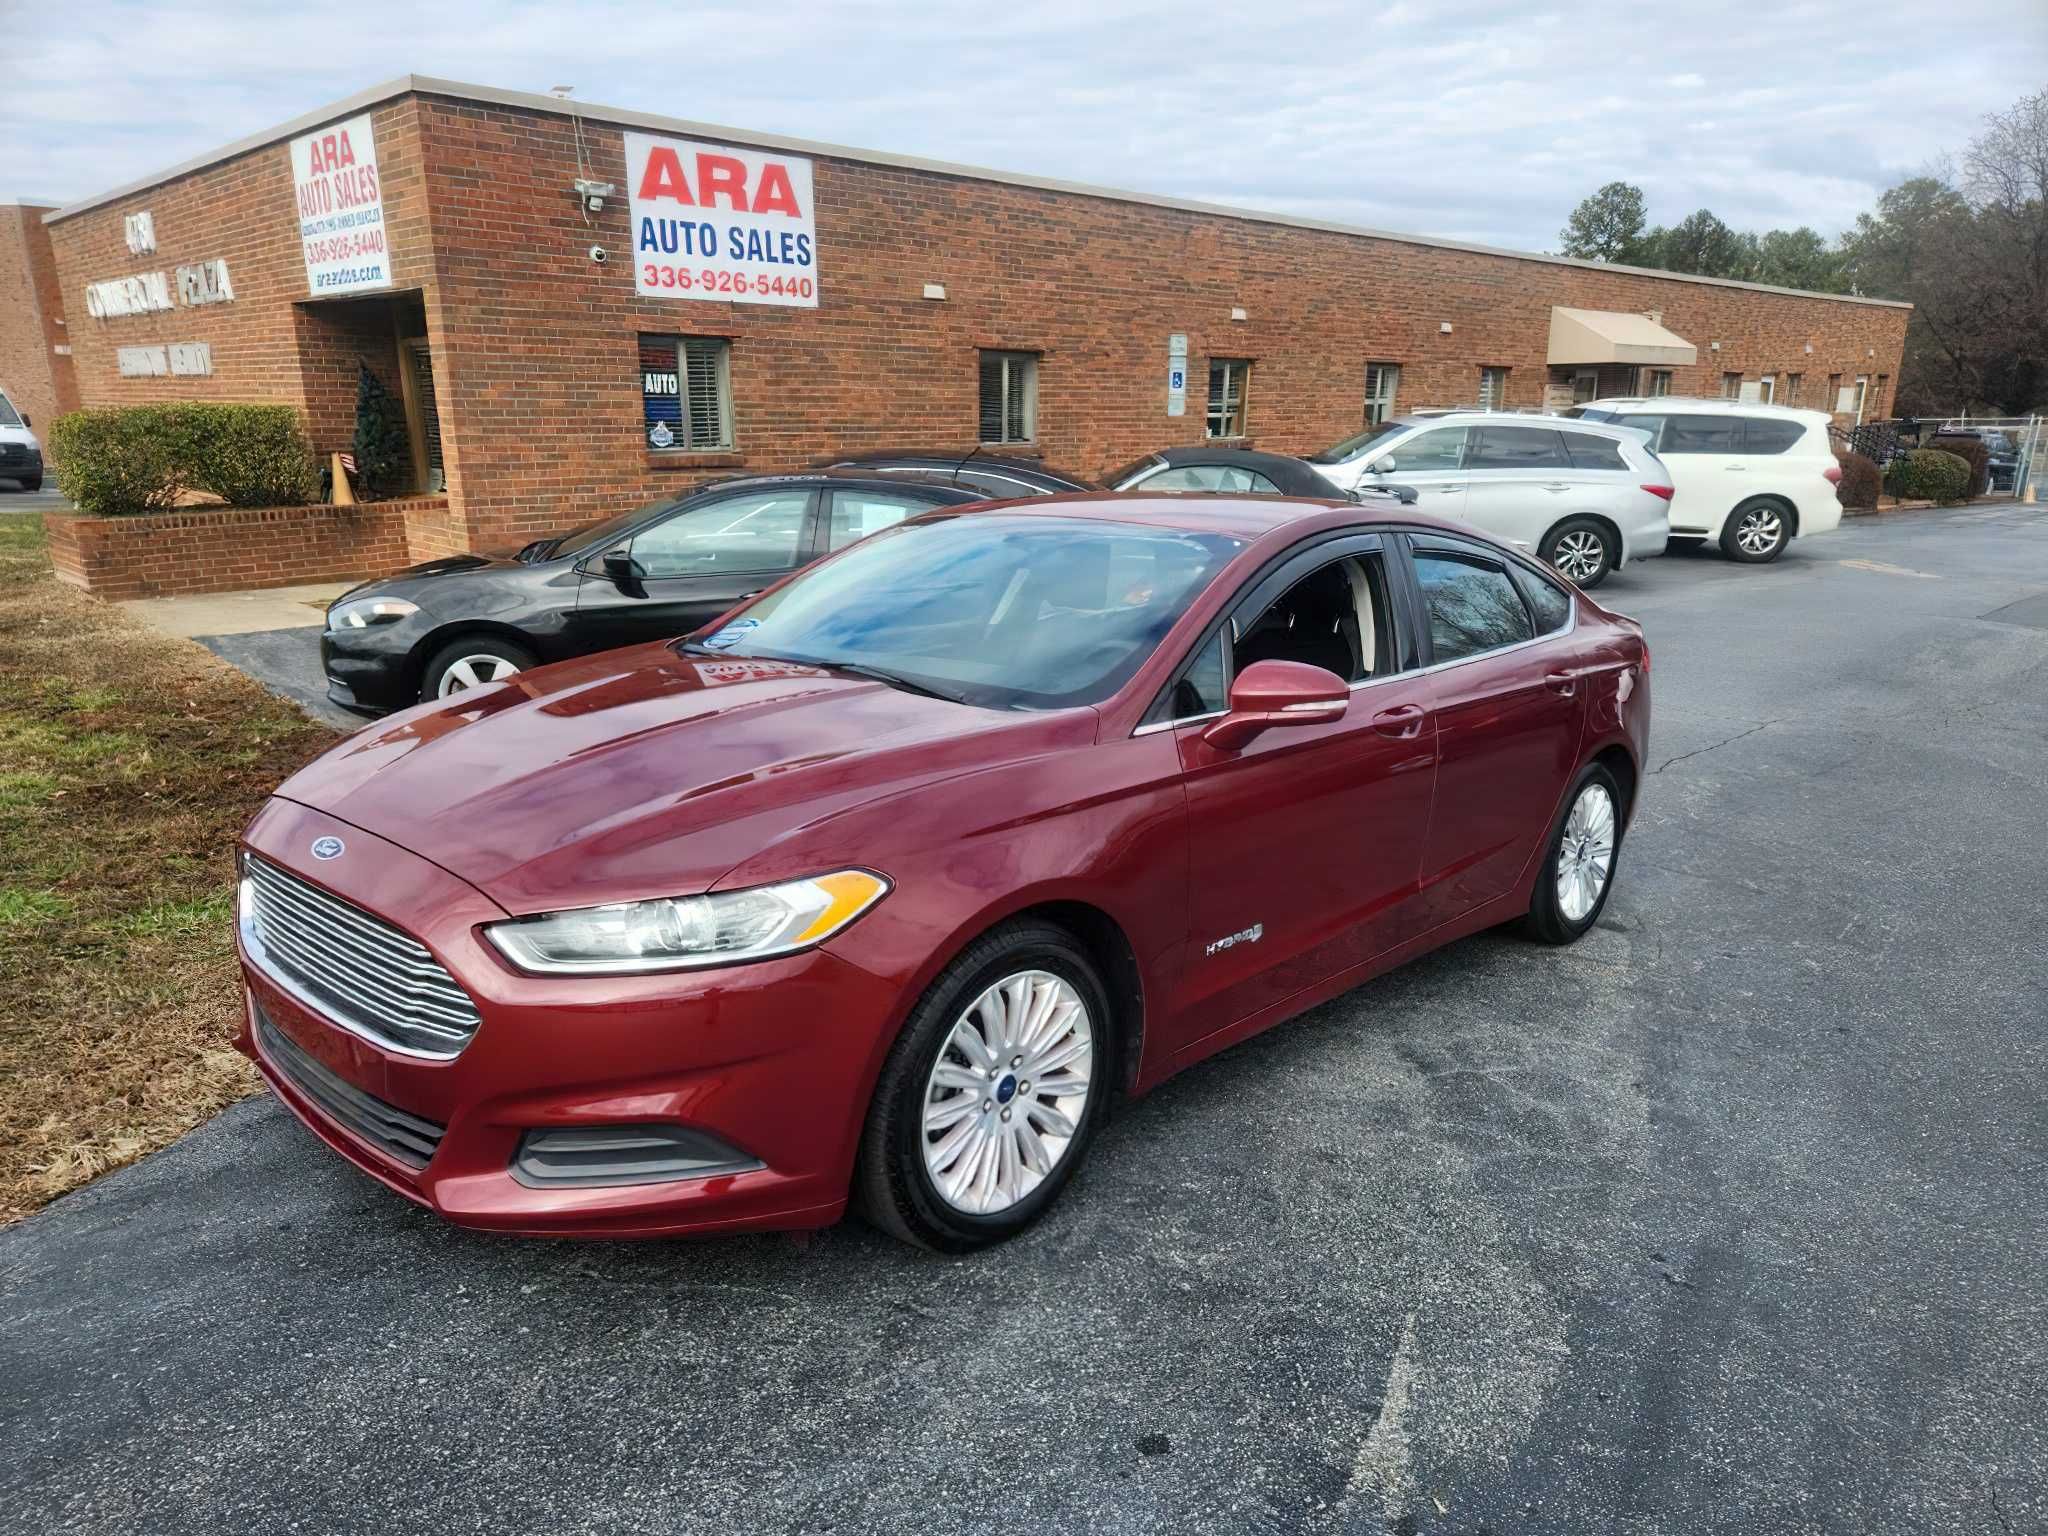 Ford Fusion 2015 2.0